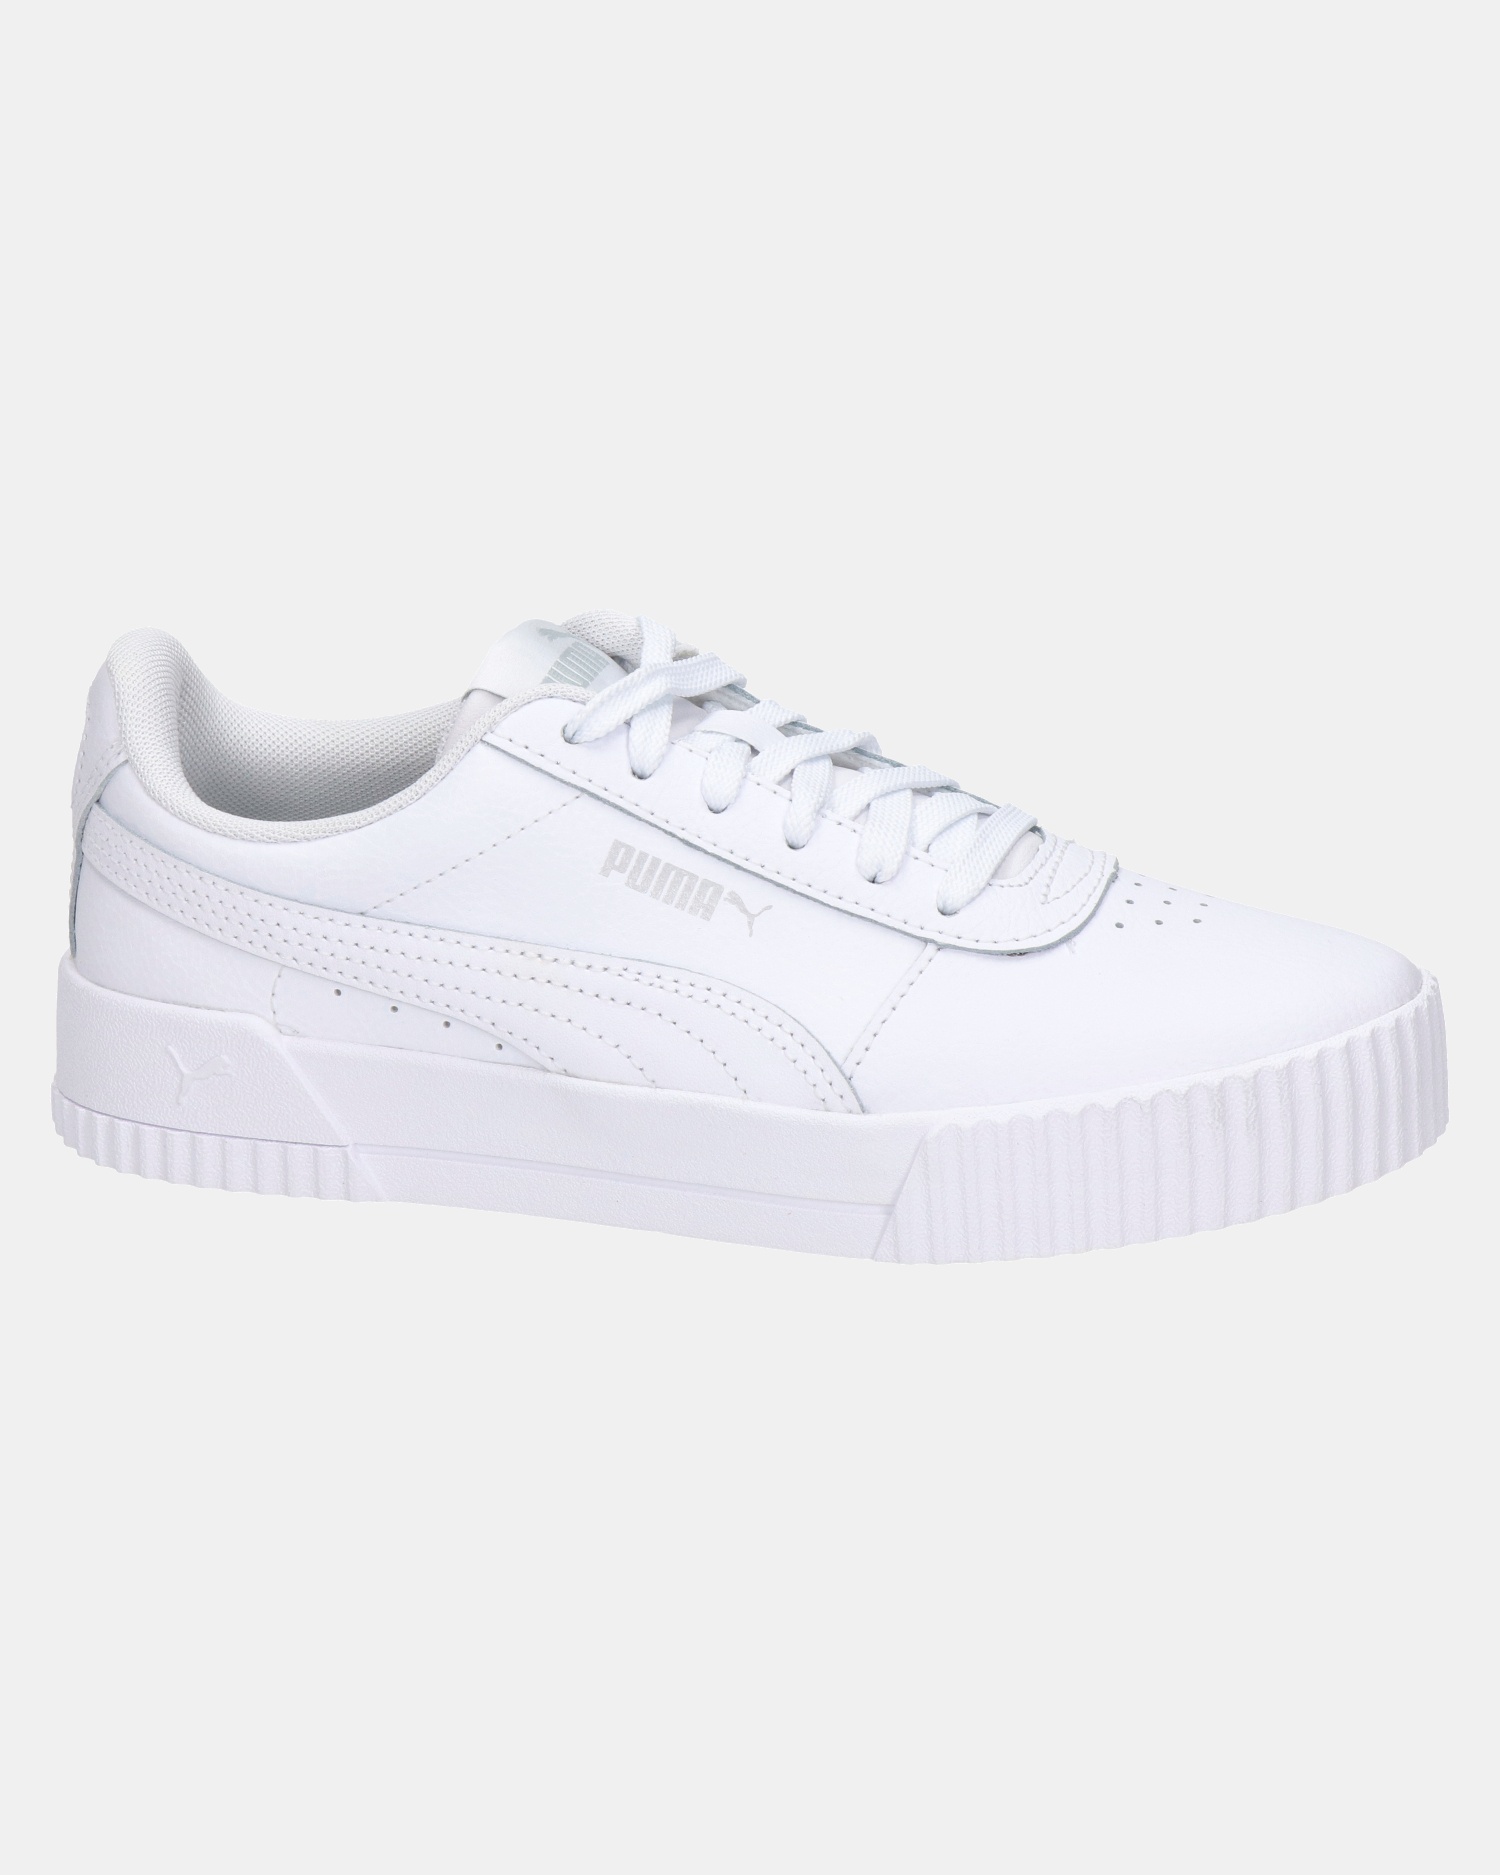 Paine Gillic formule cache Puma Carina - Lage sneakers voor dames - Wit - Nelson.nl